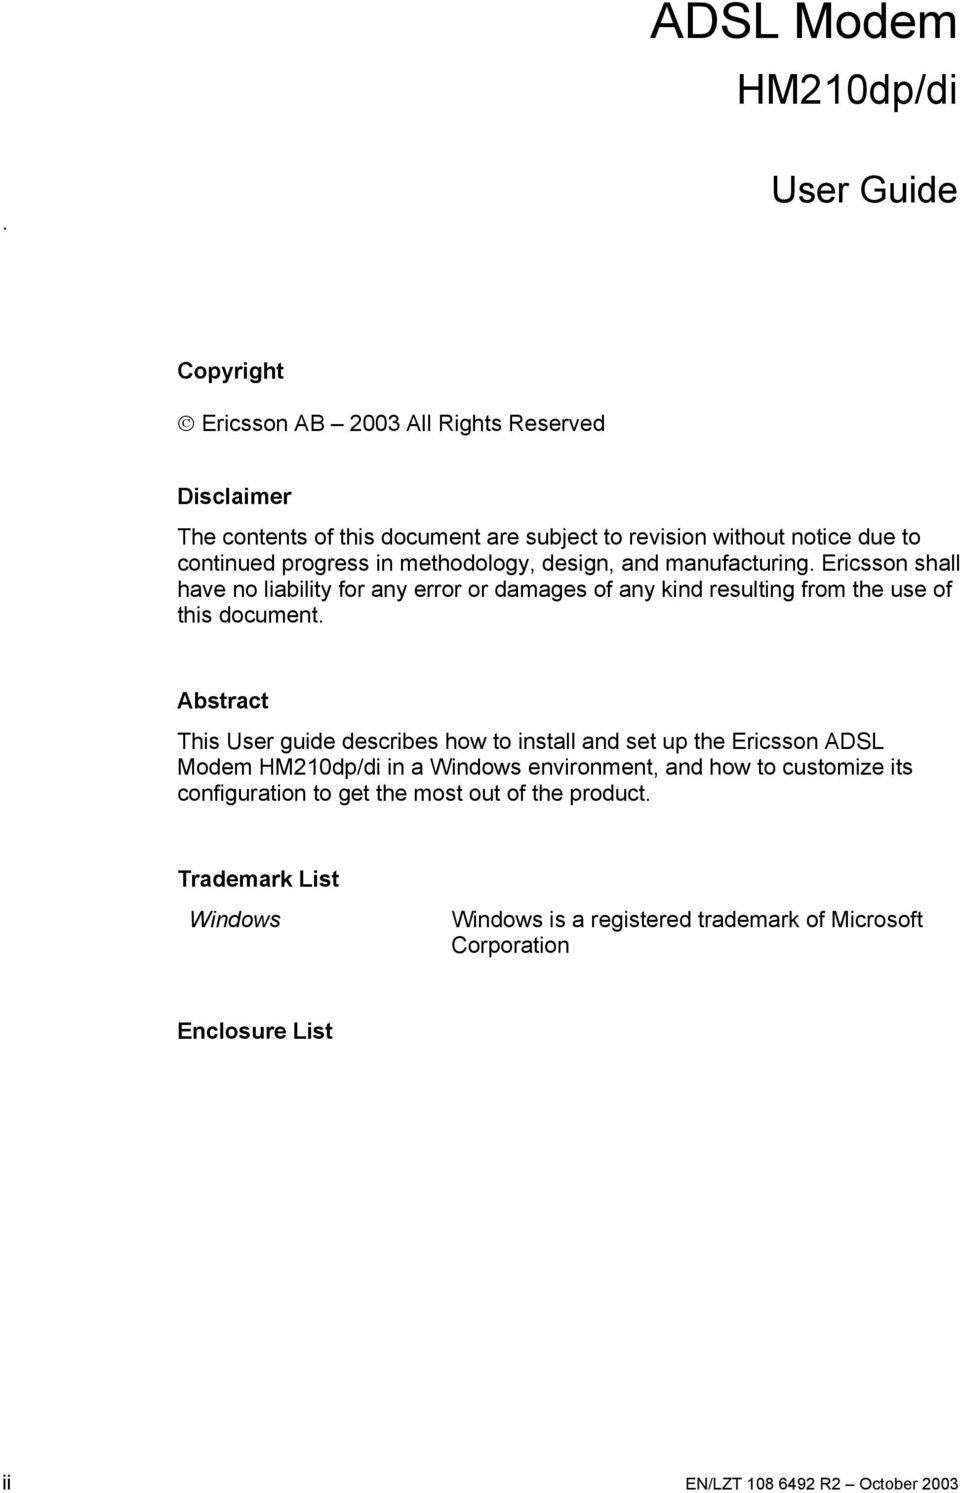 methodology, design, and manufacturing. Ericsson shall have no liability for any error or damages of any kind resulting from the use of this document.